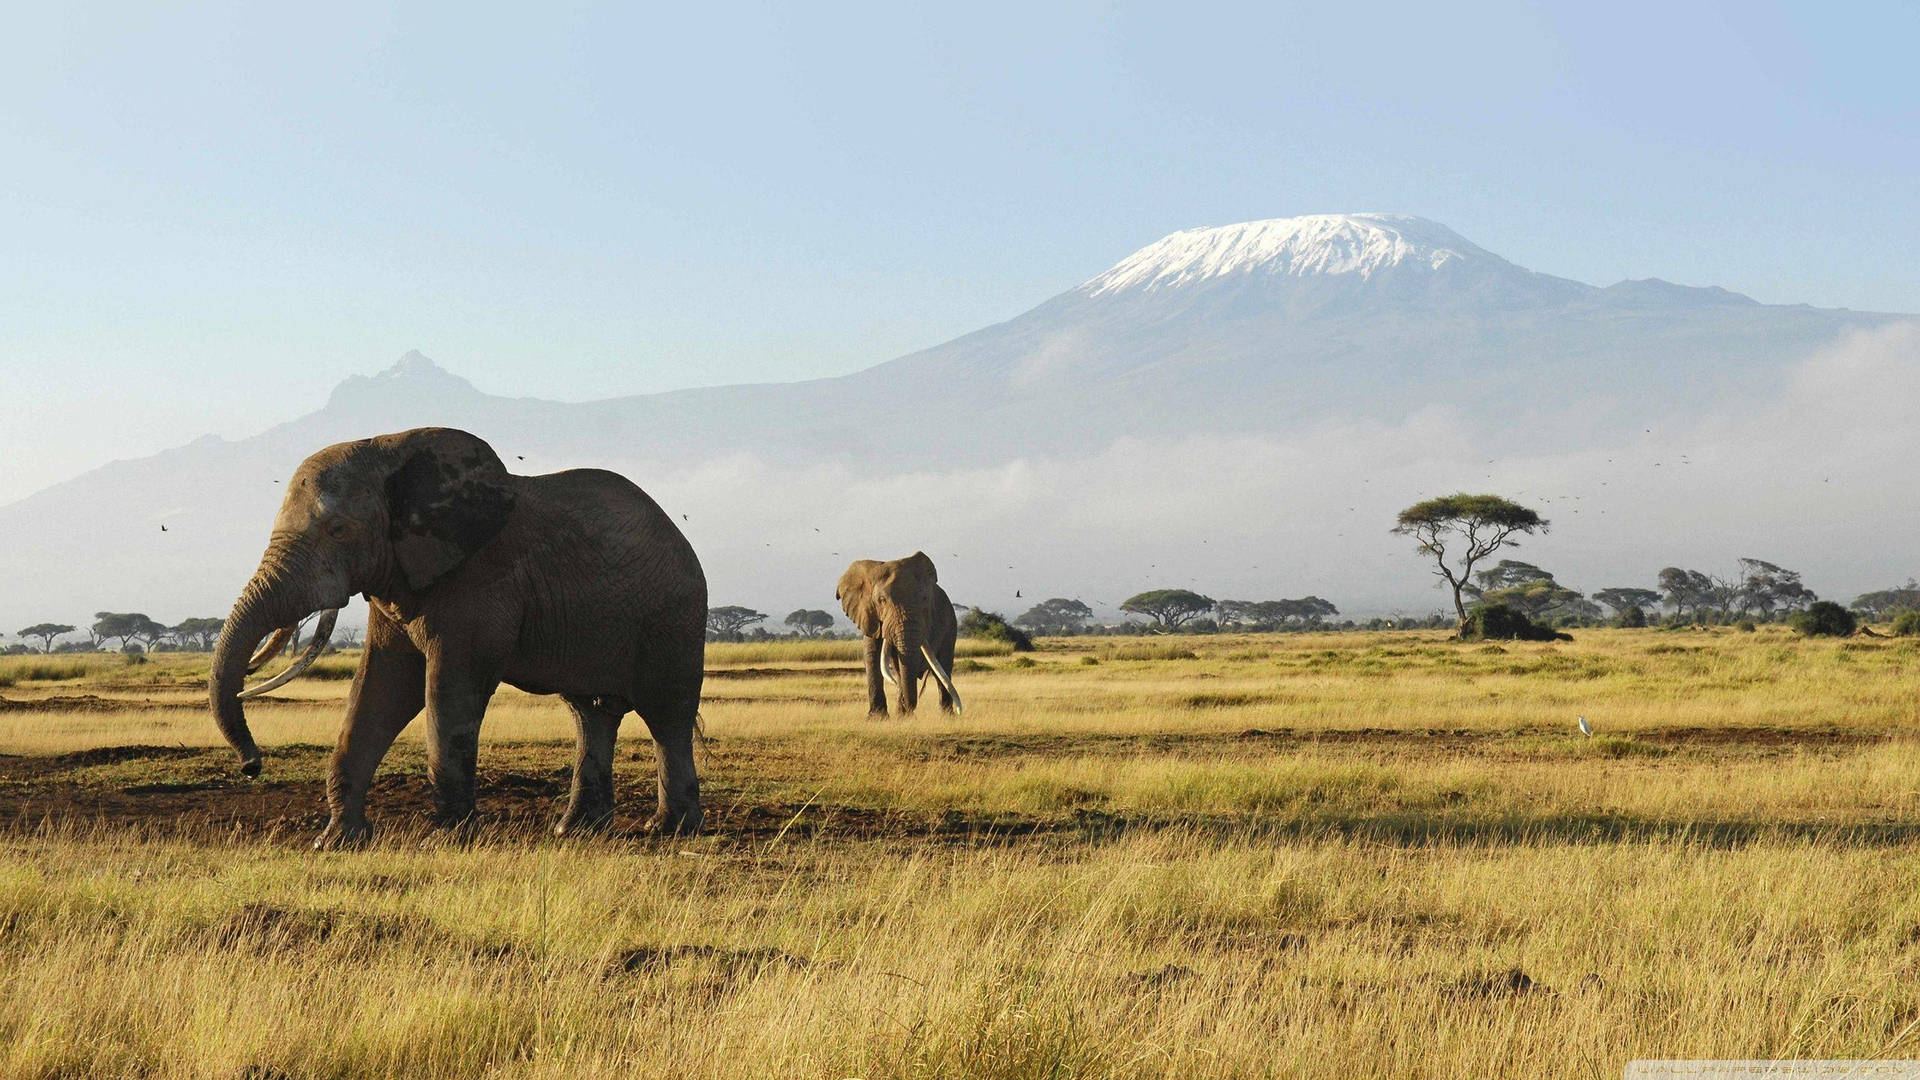 Elephant And Mountains In Africa Wallpaper